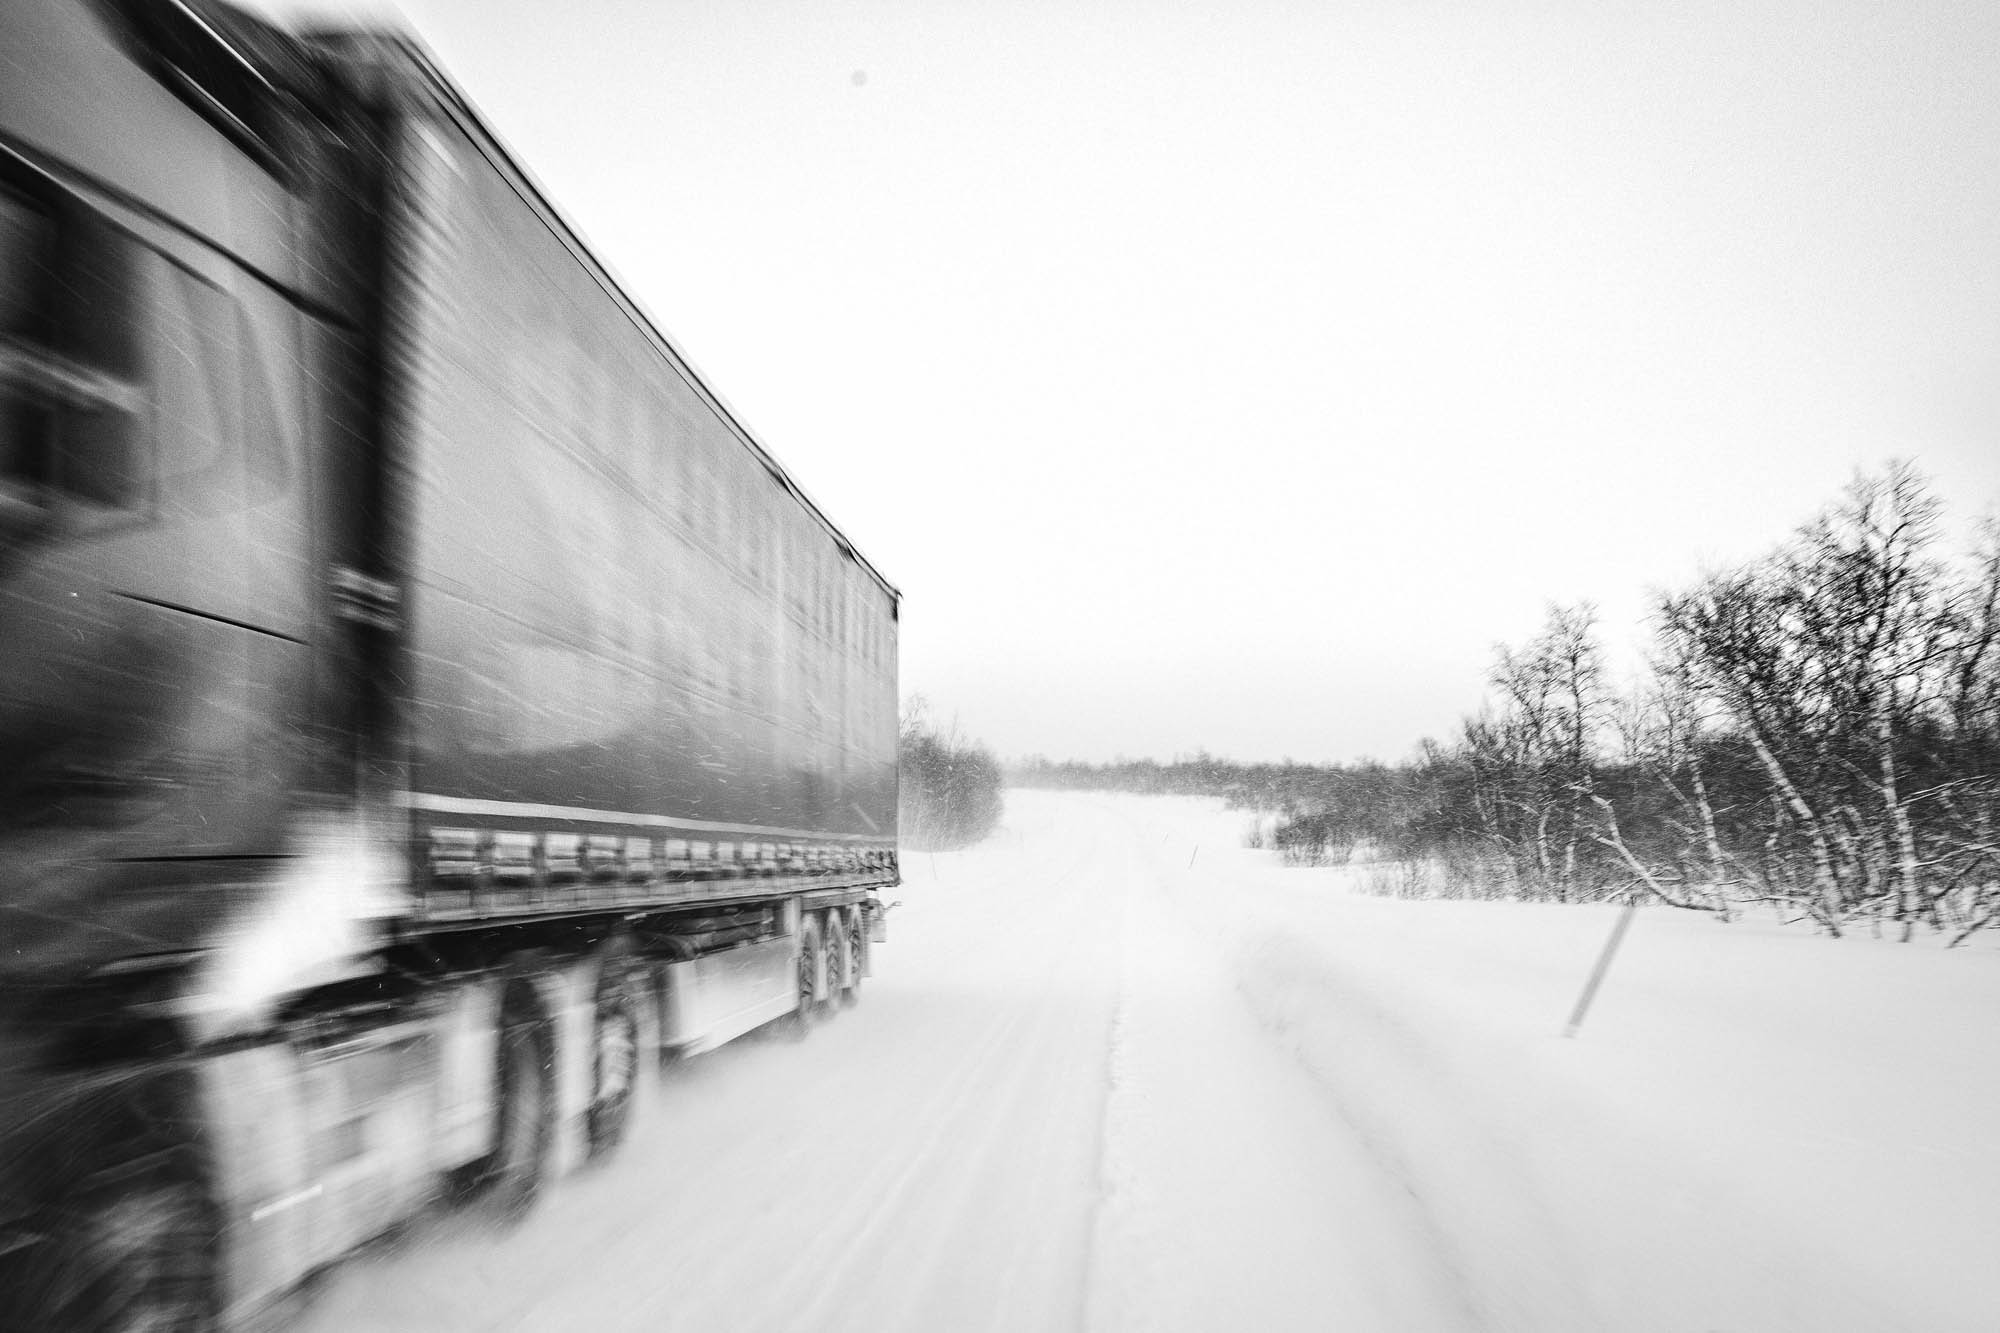 Large, 12-wheeler articulated lorry speeds into foreground, snowy road behind